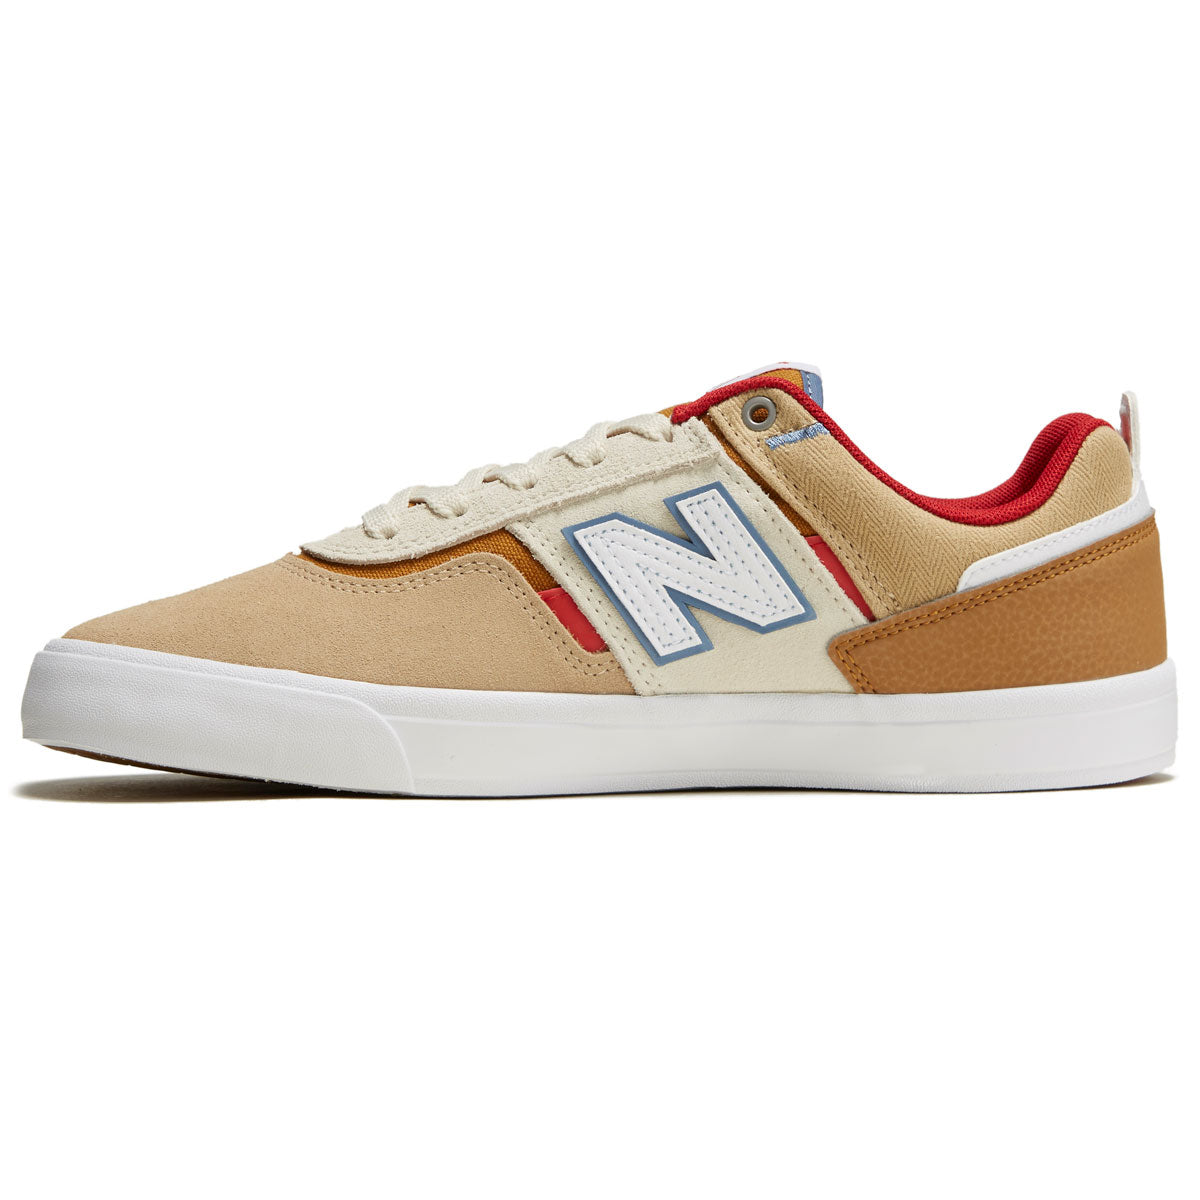 New Balance 306 Foy Shoes - Tan/Red image 2